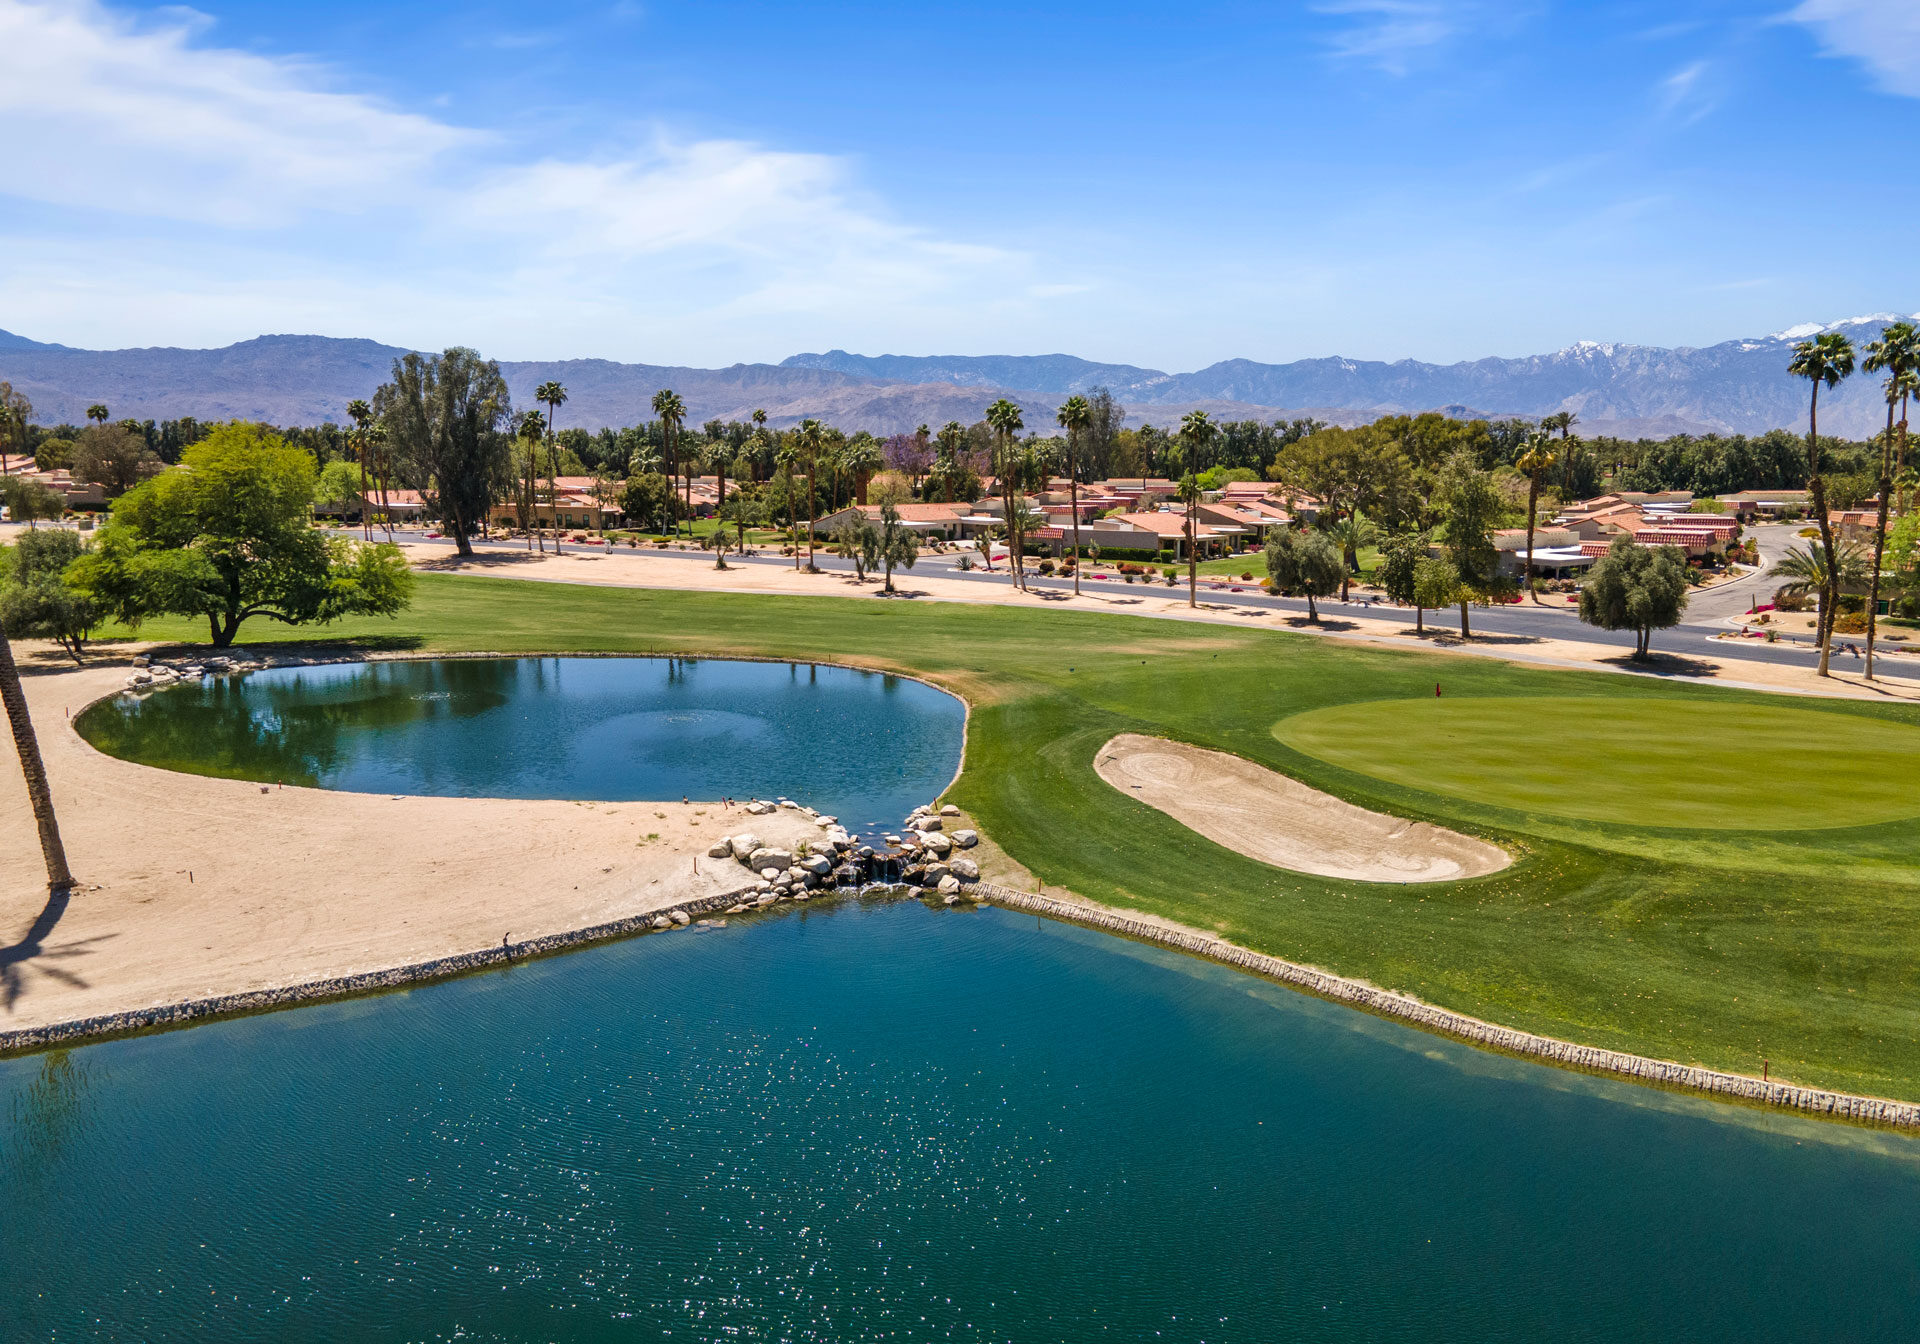 Aerial view of Palm Desert in California with blue lakes, homes and lots of palm trees